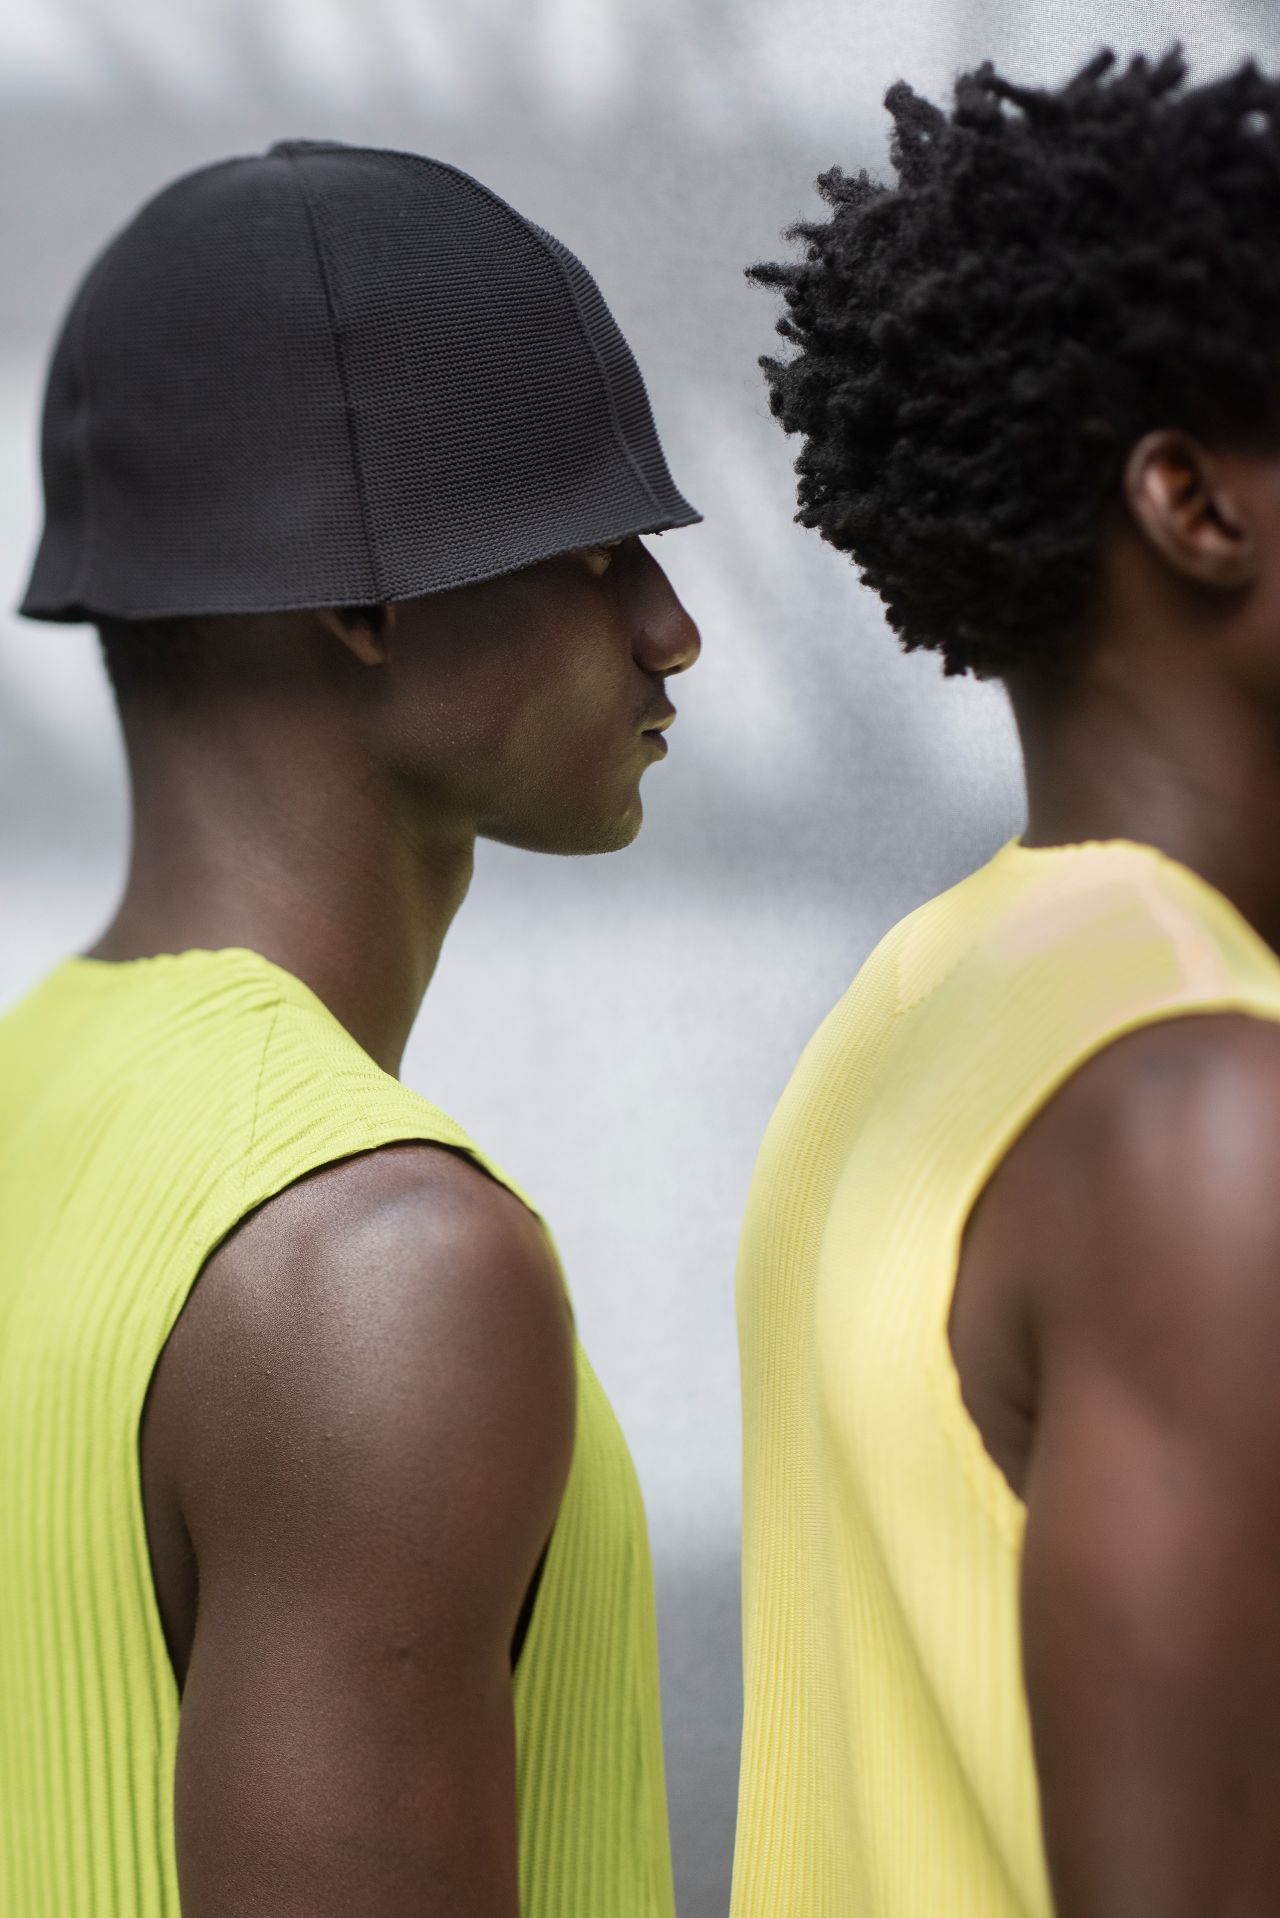 A vibrant, zesty color palette was also on show at Issey Miyake.